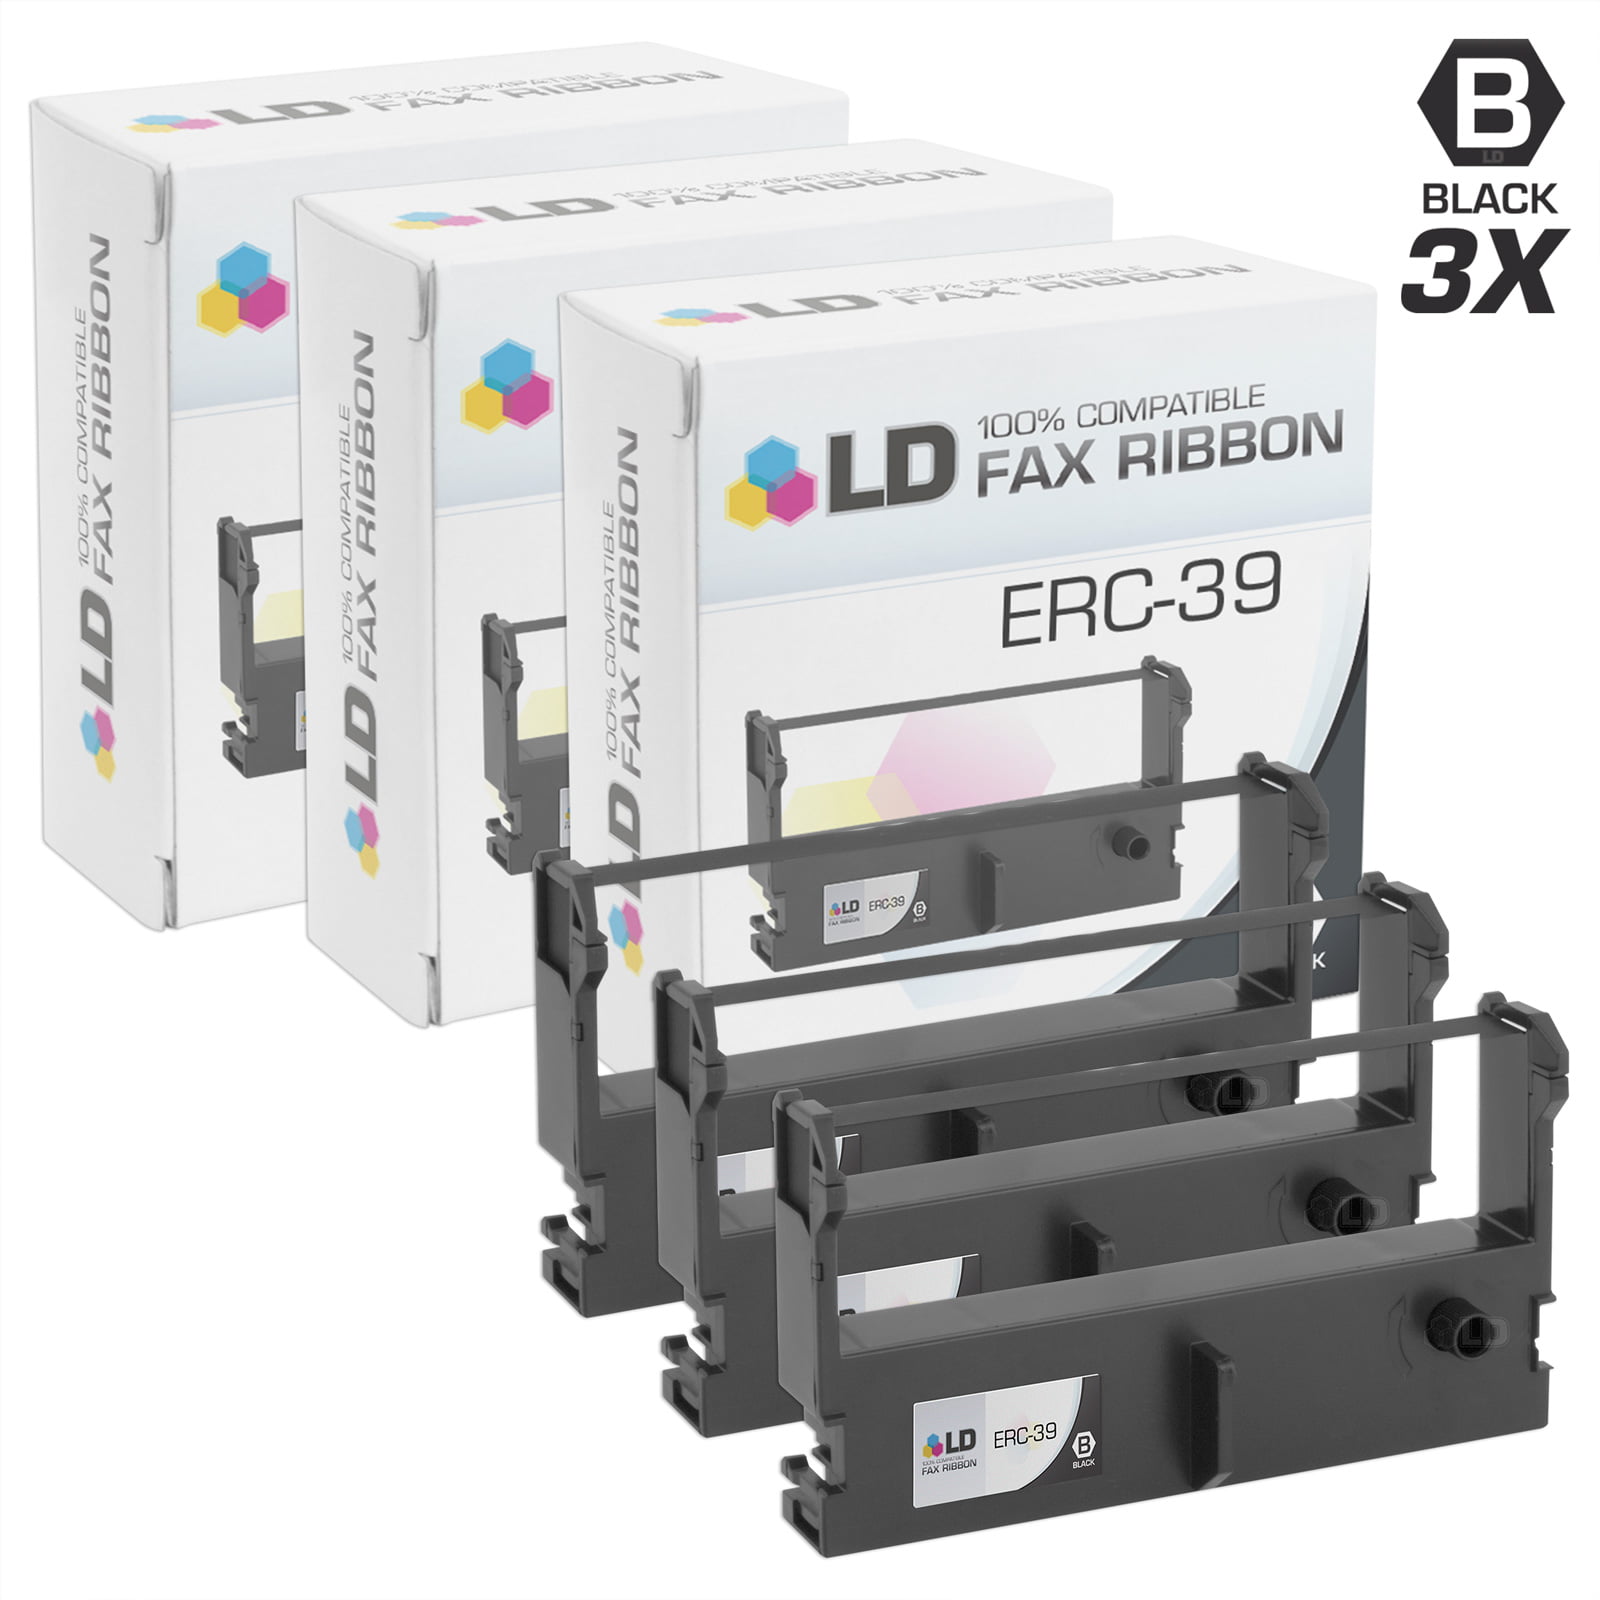 LD Compatible Printer Ribbon Cartridge Replacement for Epson ERC-39 Black & Red, 5-Pack 